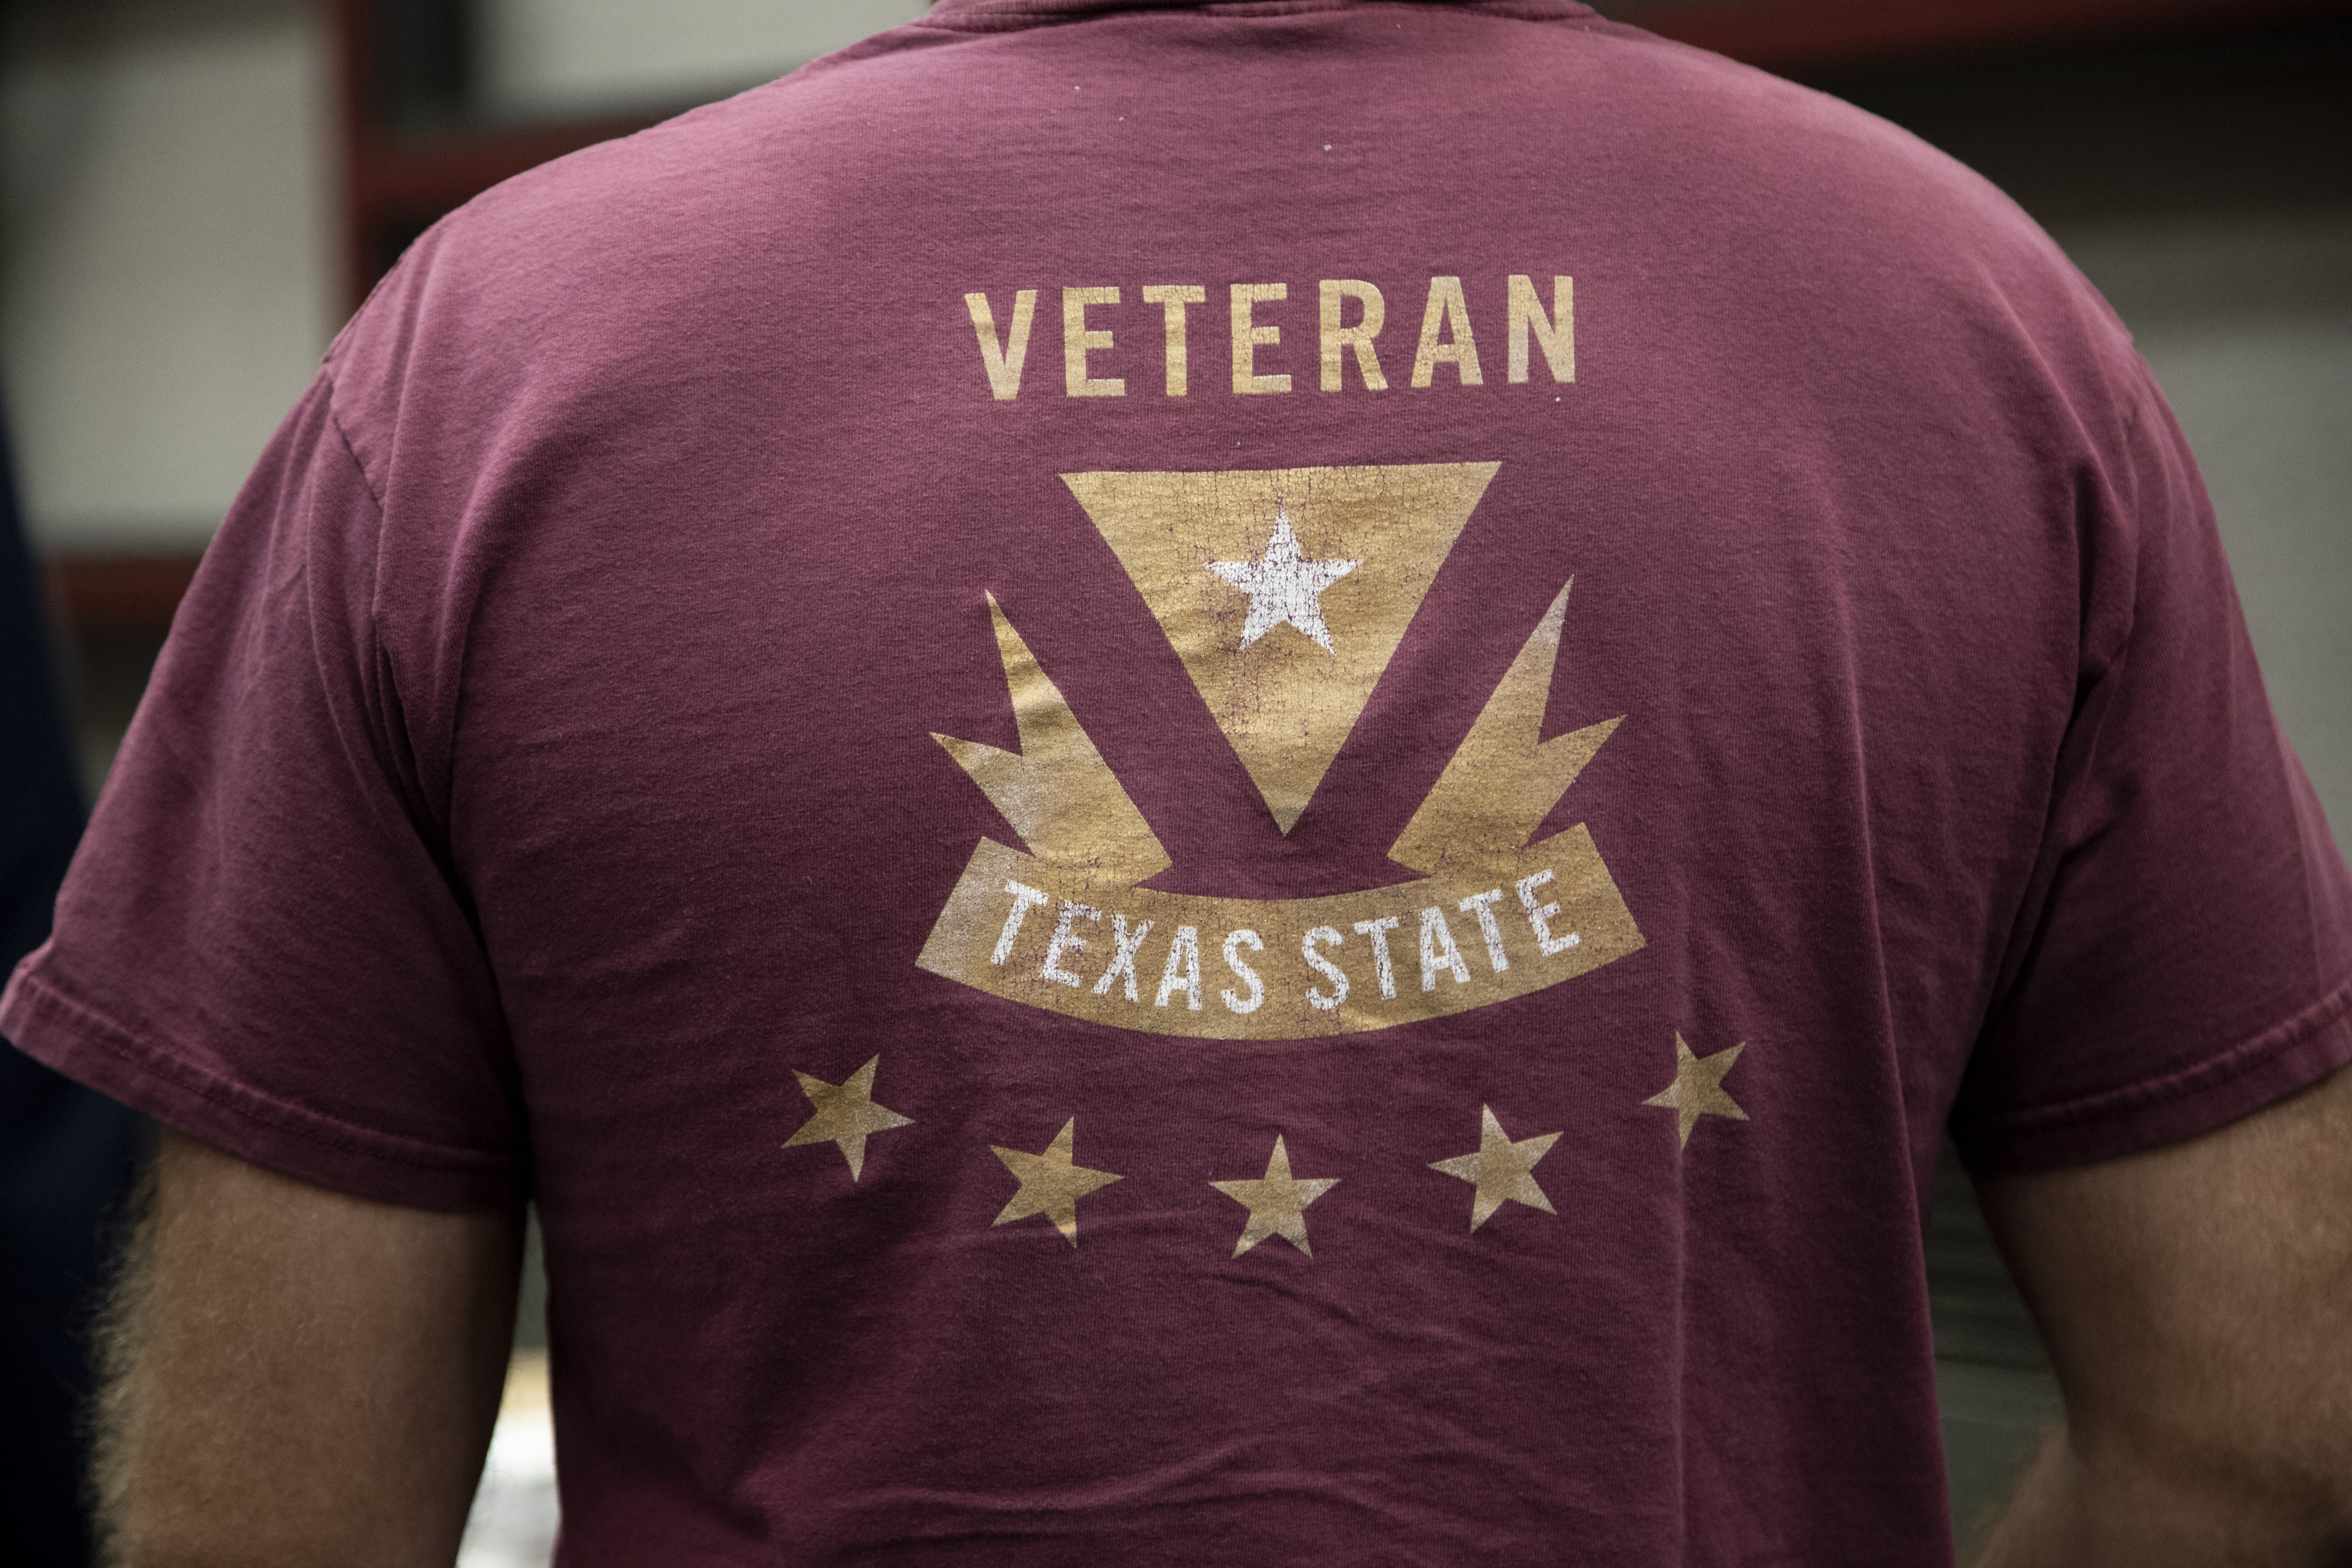 Close-up image of a person's back wearing a red t-shirt that says VETERAN TEXAS STATE.